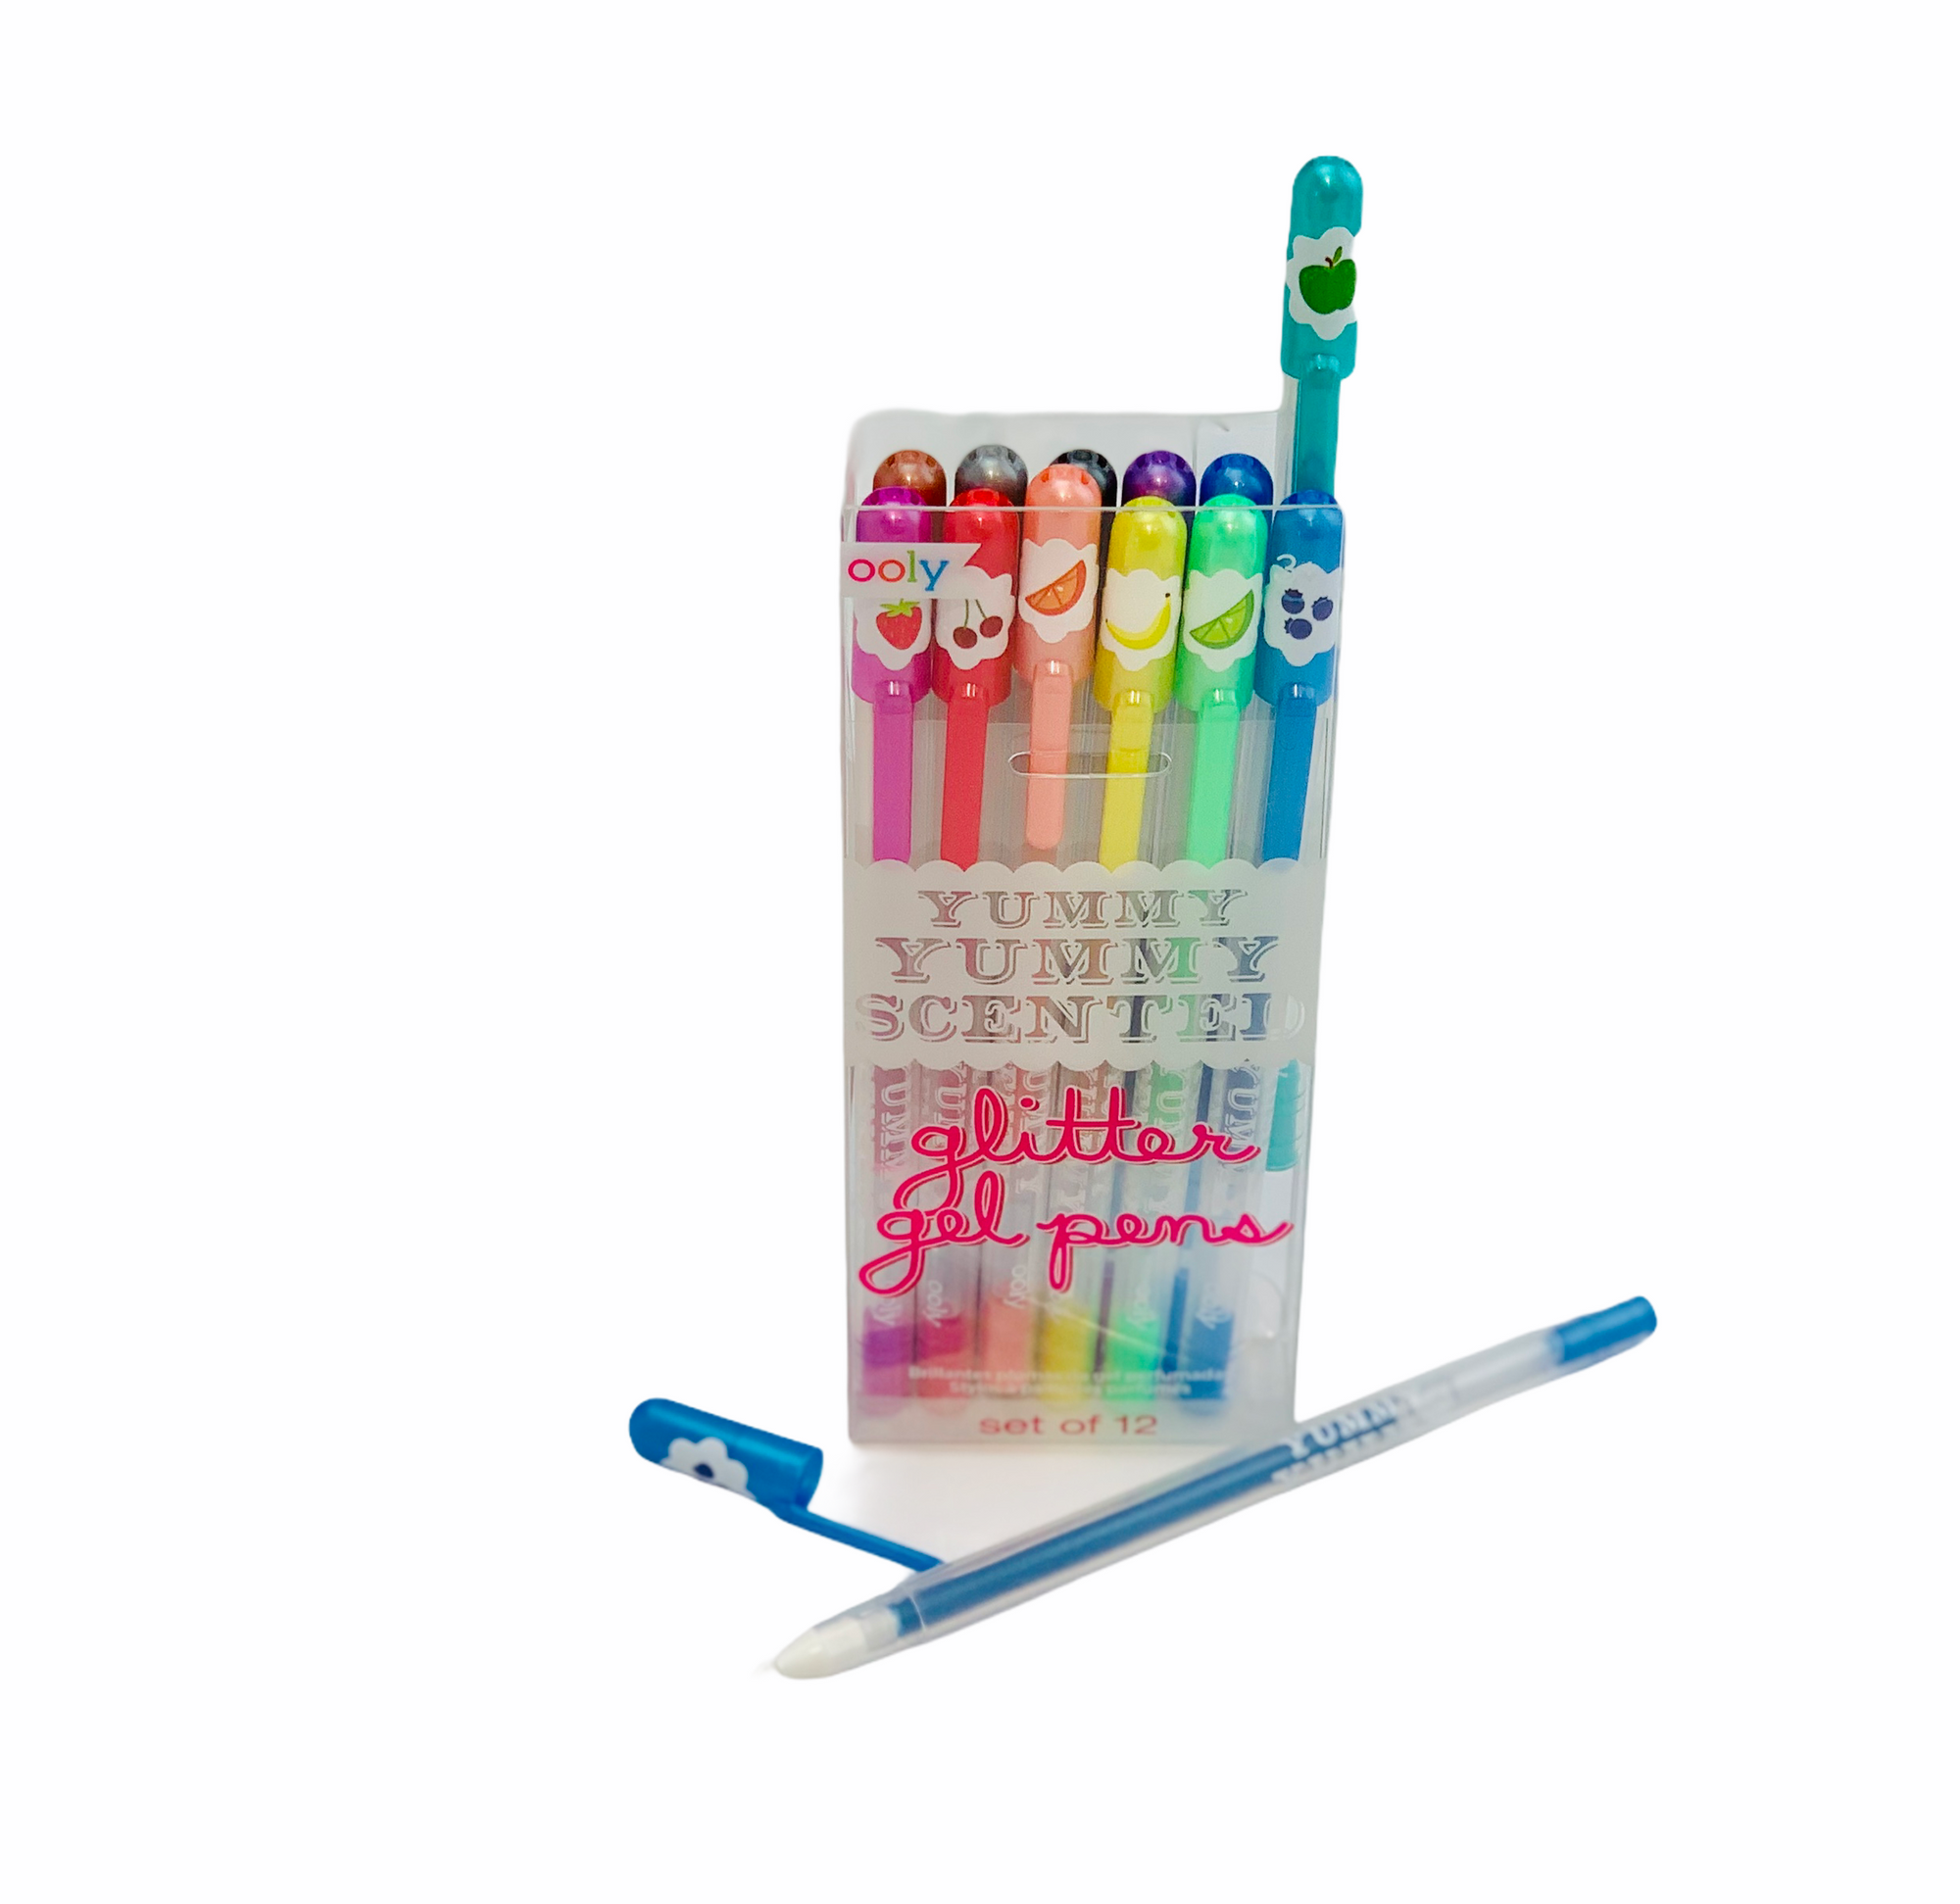 Scented Glitter Gel Pens with blue pen outside of box